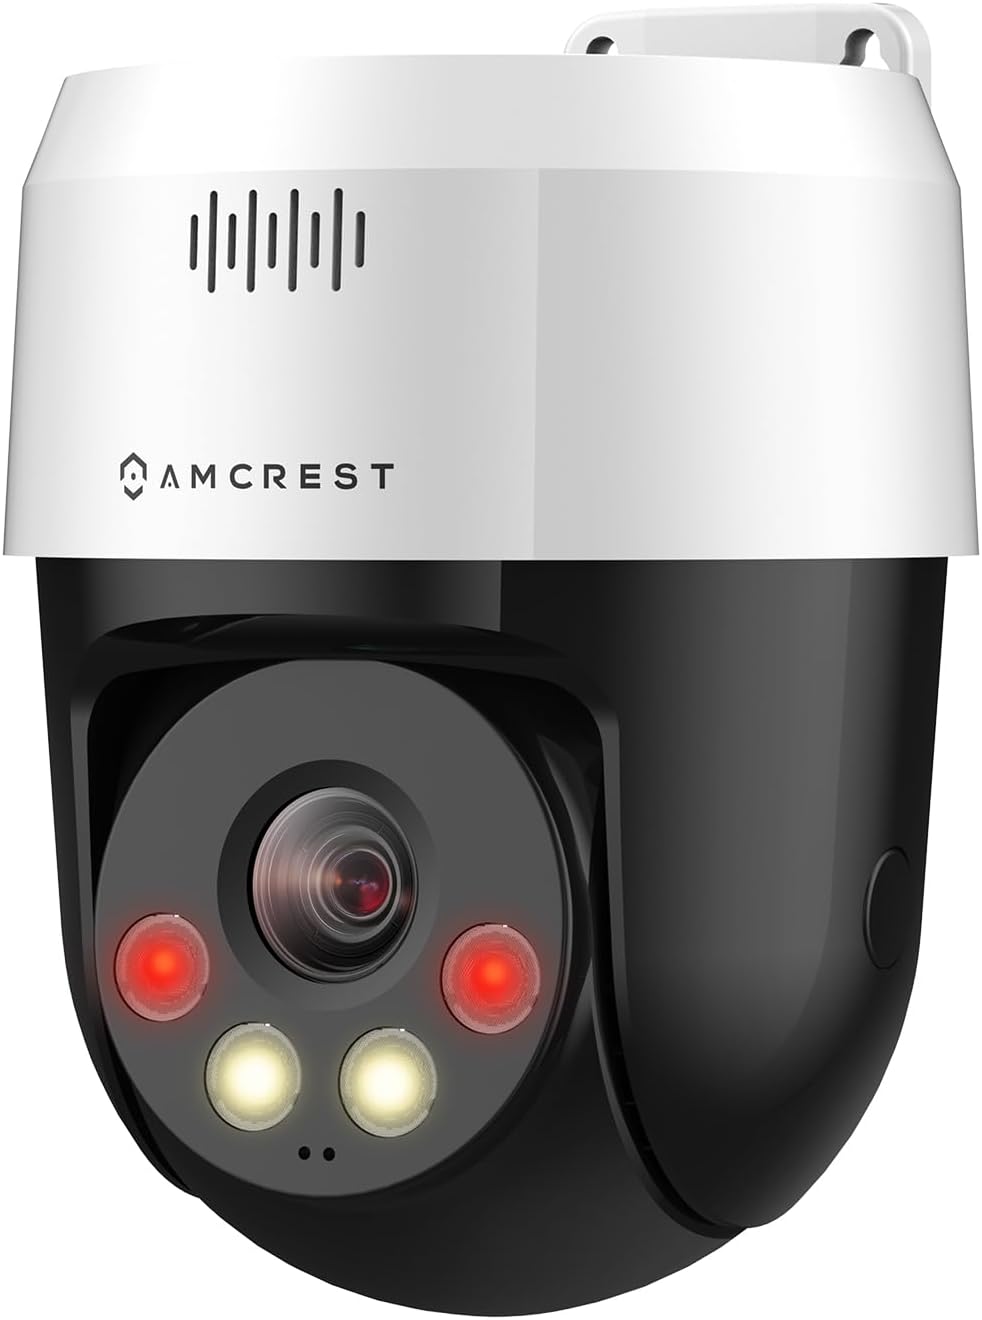 Amcrest 5MP UltraHD Mini AI Outdoor IP PoE Camera, Security IP Camera with Two-Way Audio, IP5M-1190EW (White)